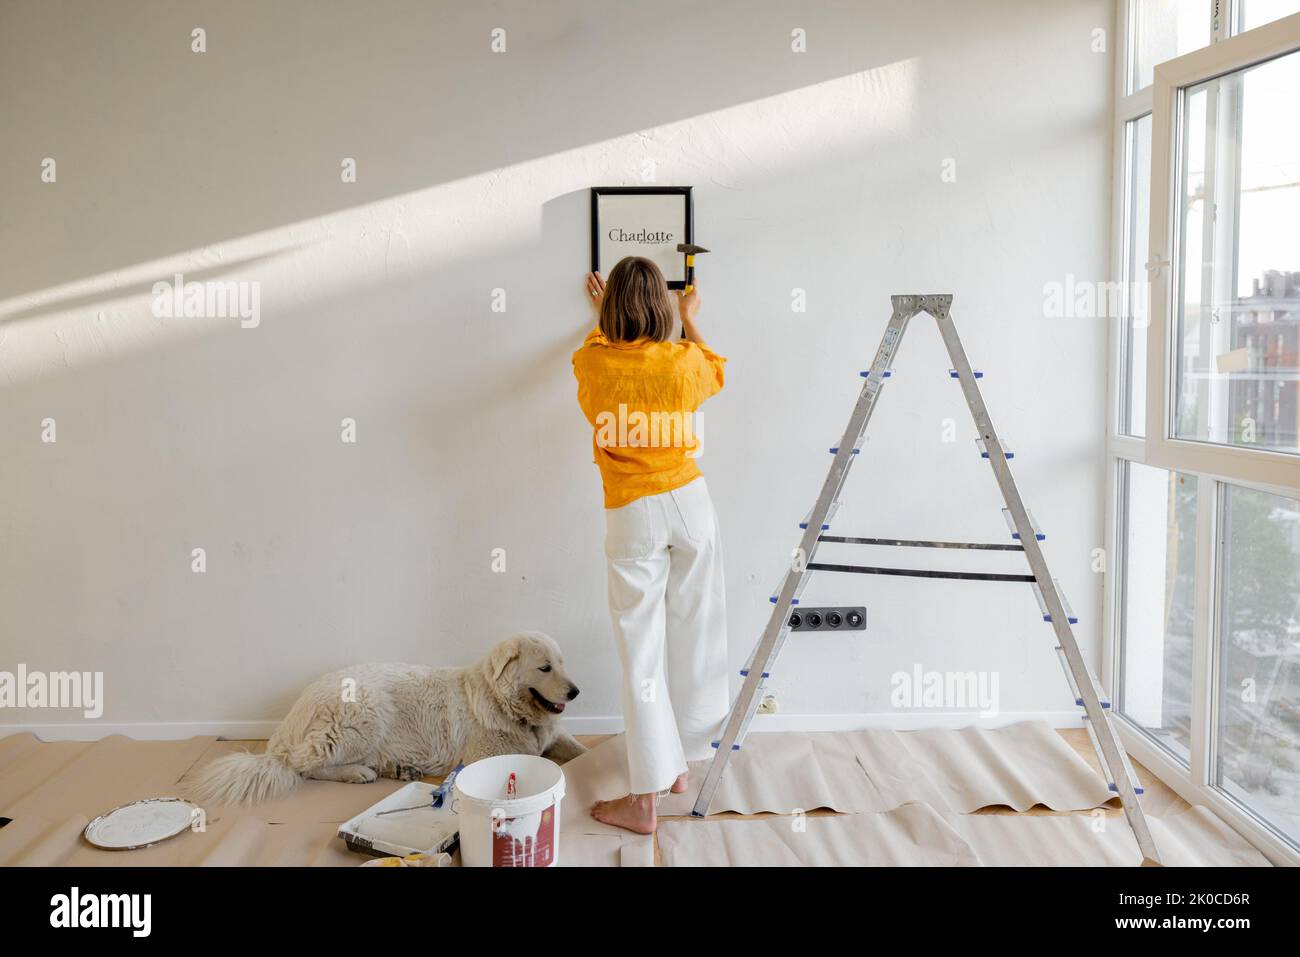 Young woman hanging picture frame in room, decorating her newly renovated apartment, stands with her dog in white room Stock Photo